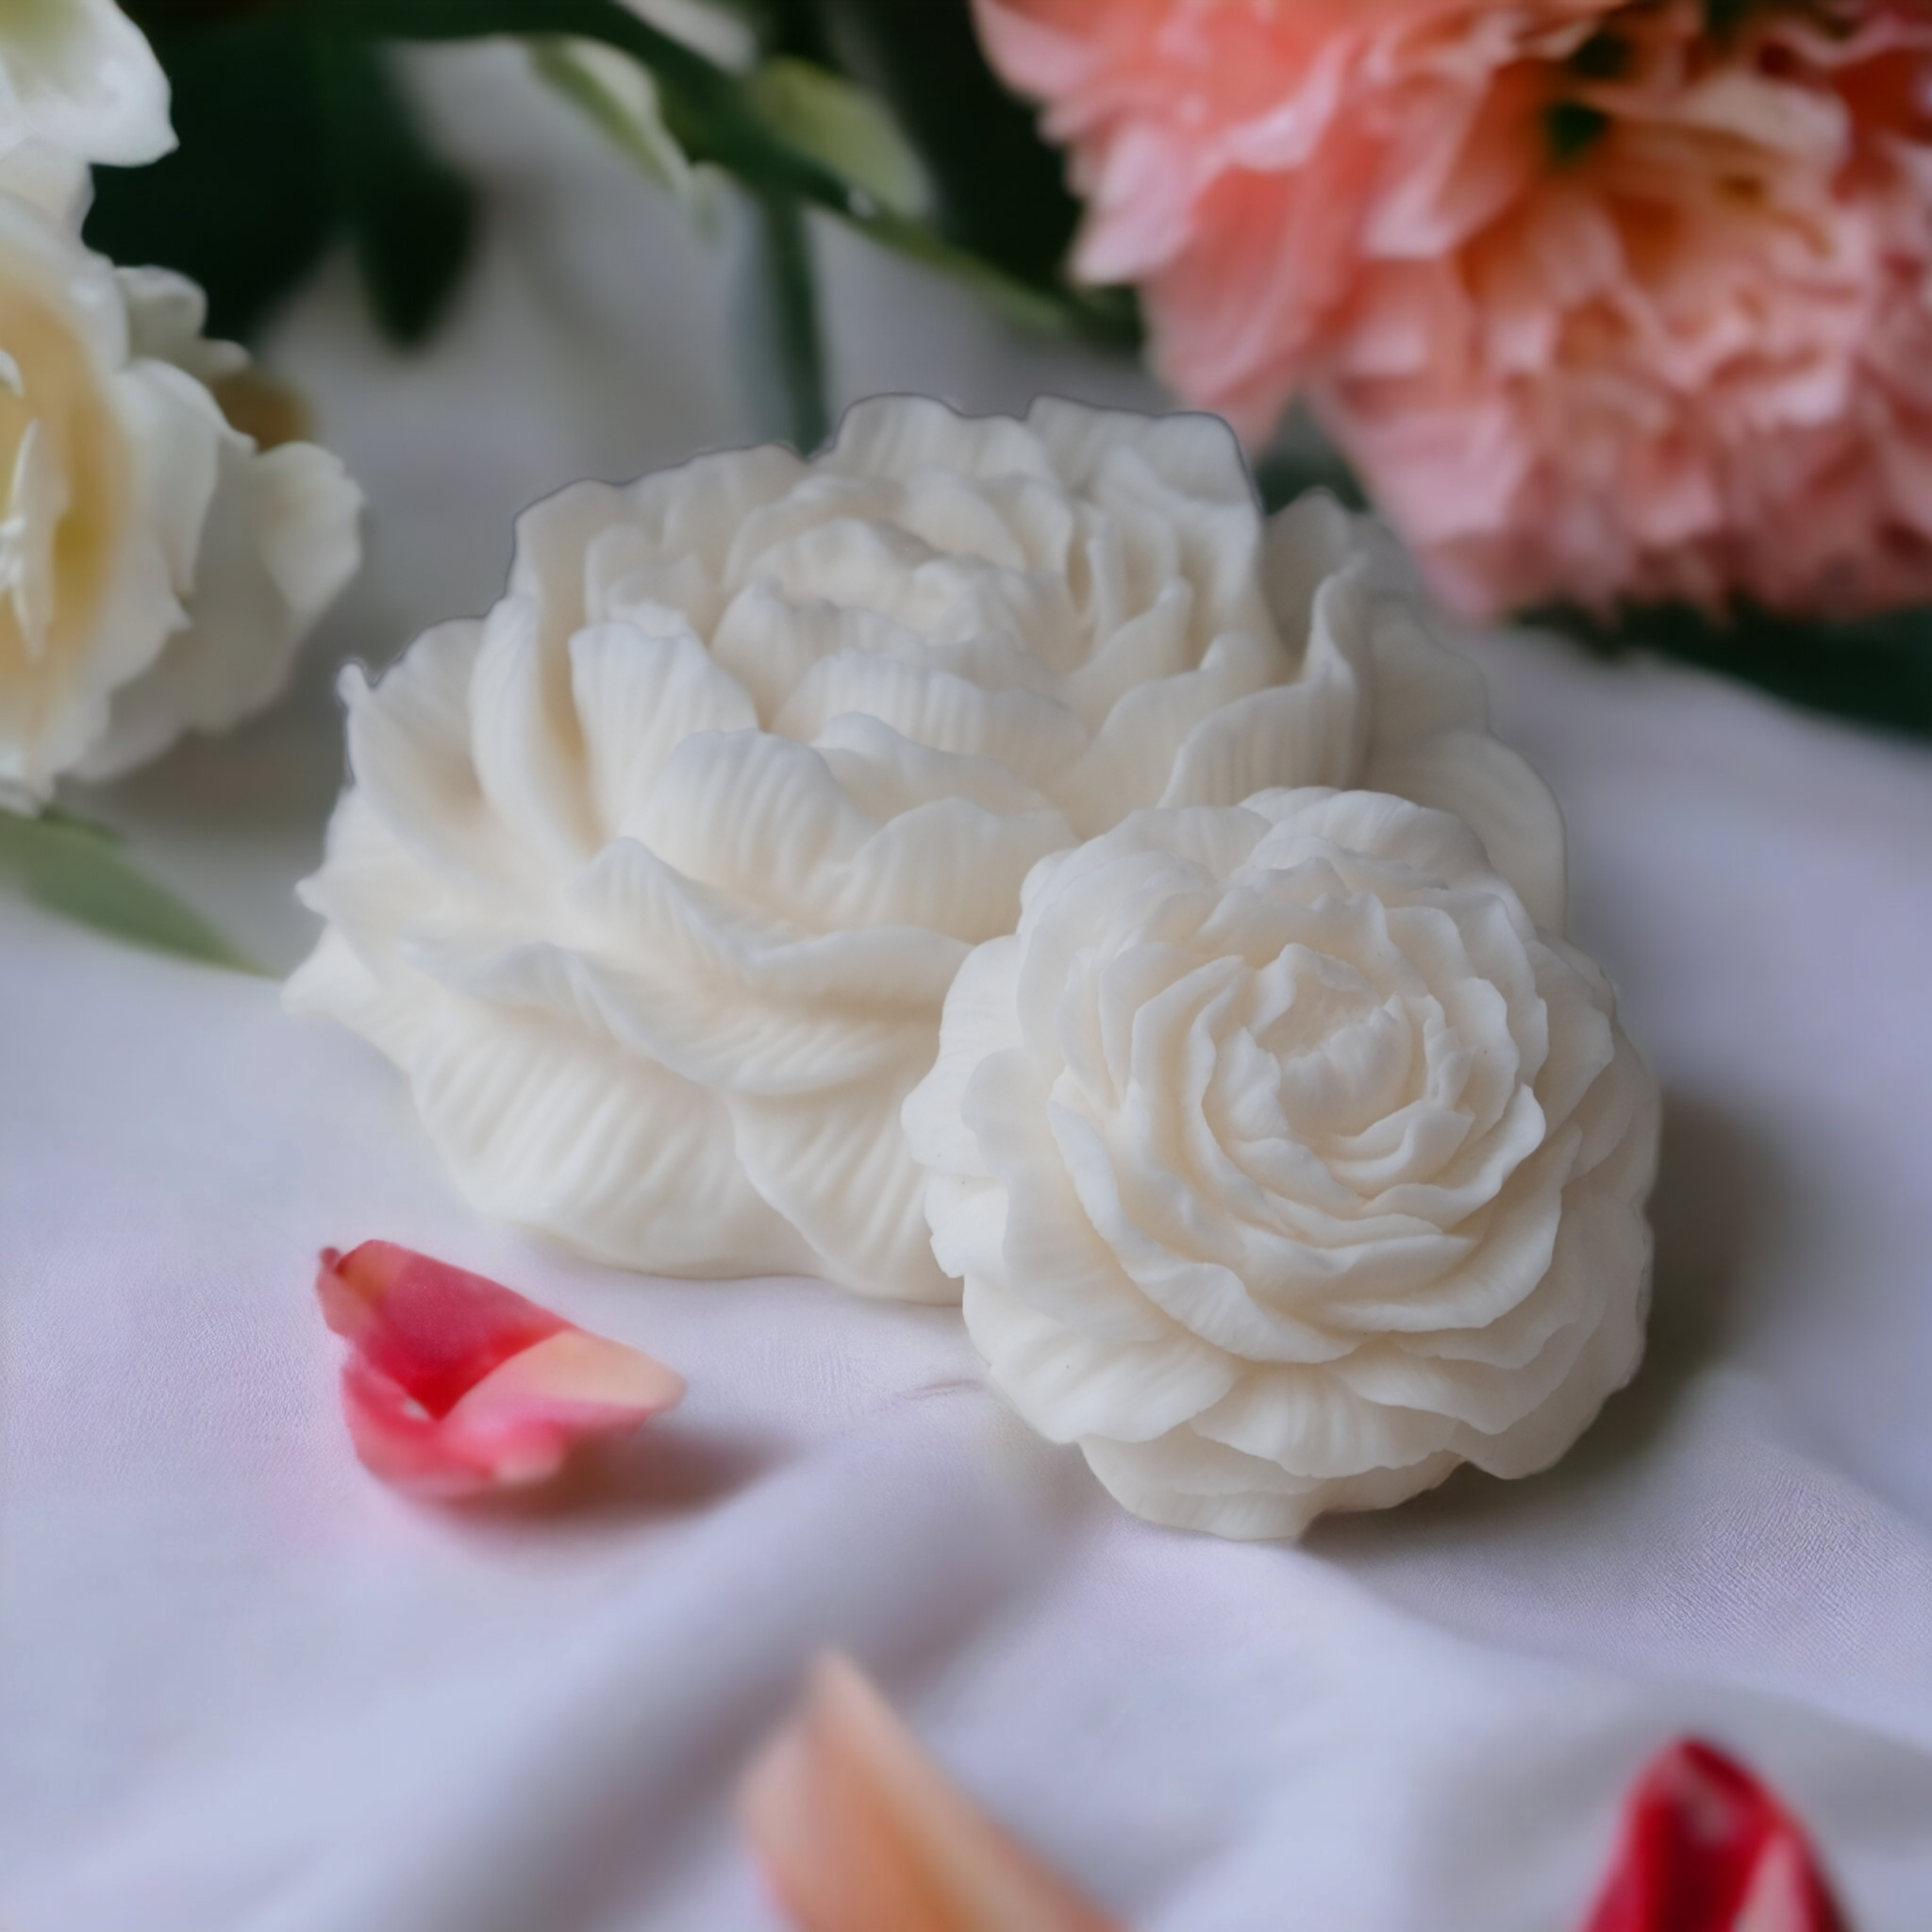 New Styles The Large Sized Peony Flower Candle Mold Weddings Birthdays  Mother'S Day Gifts